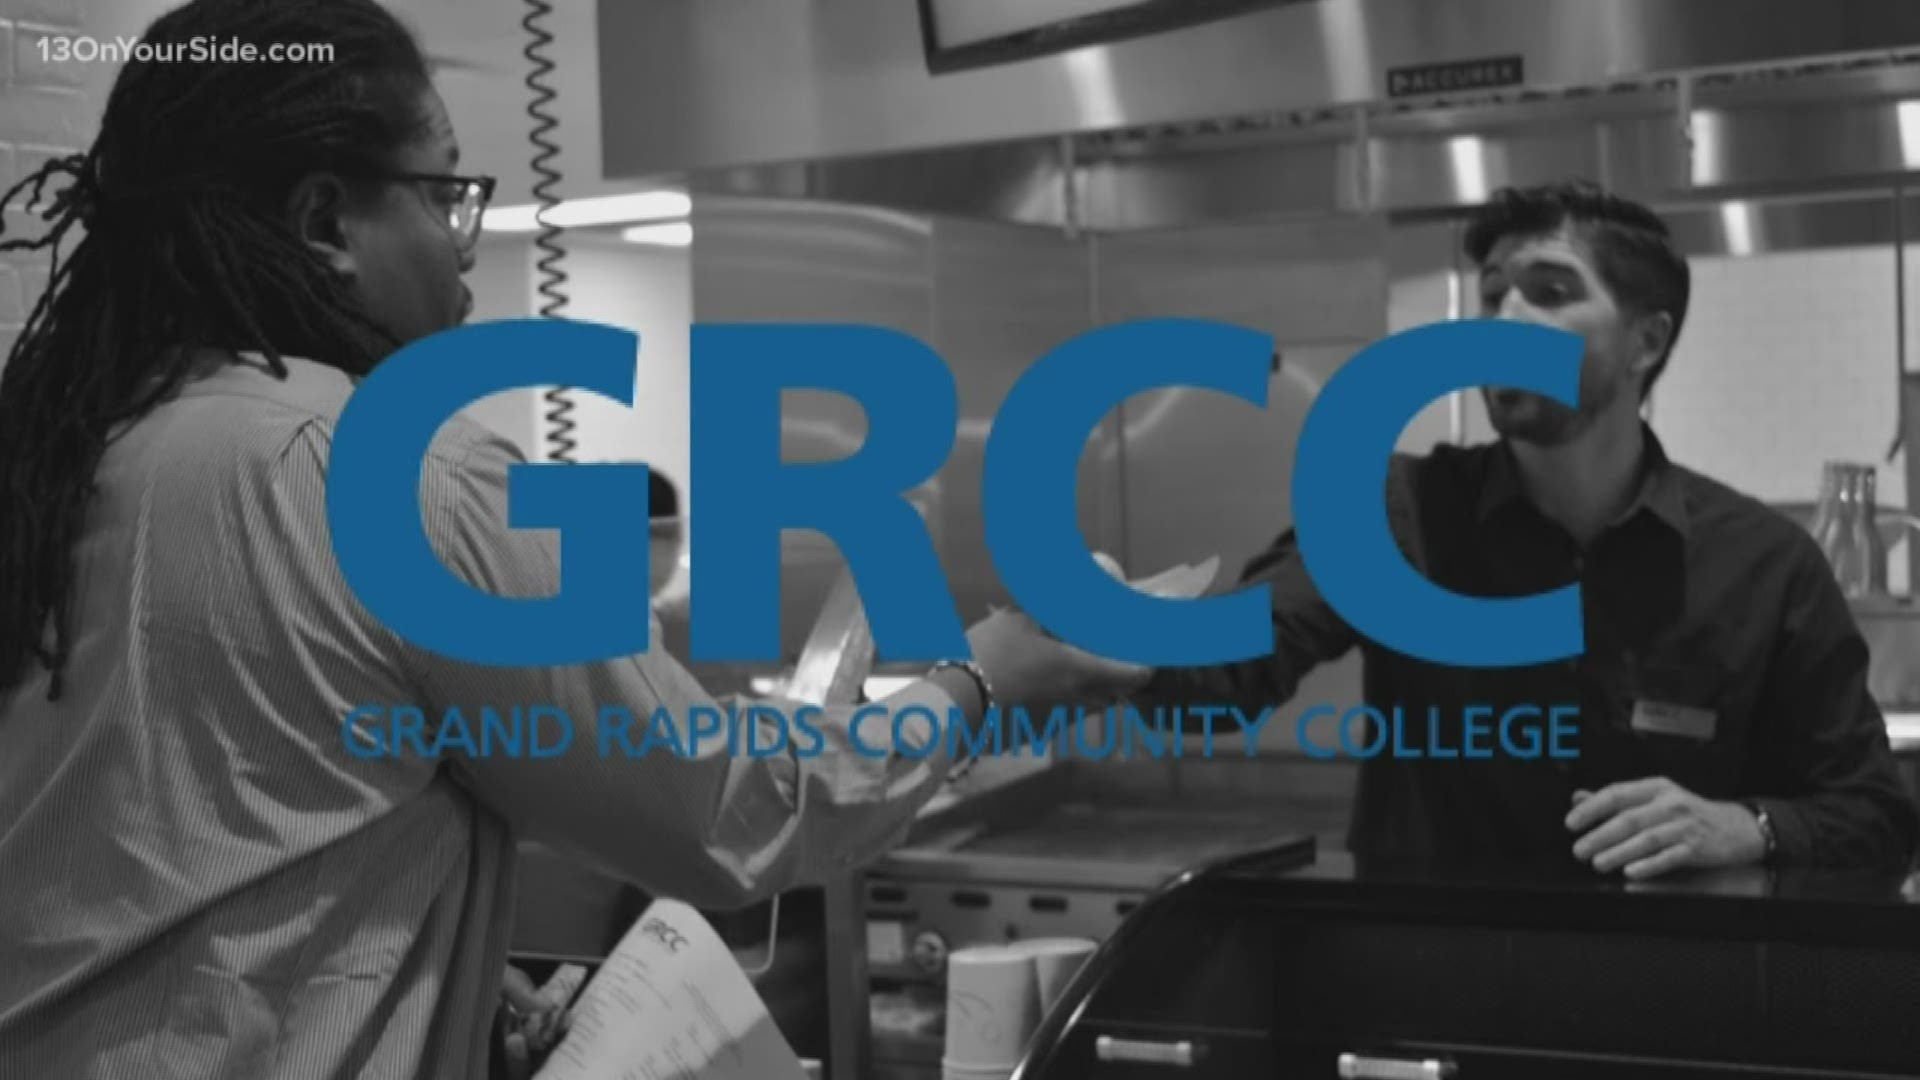 Students will see reduced prices on GRCC's campus at two locations.